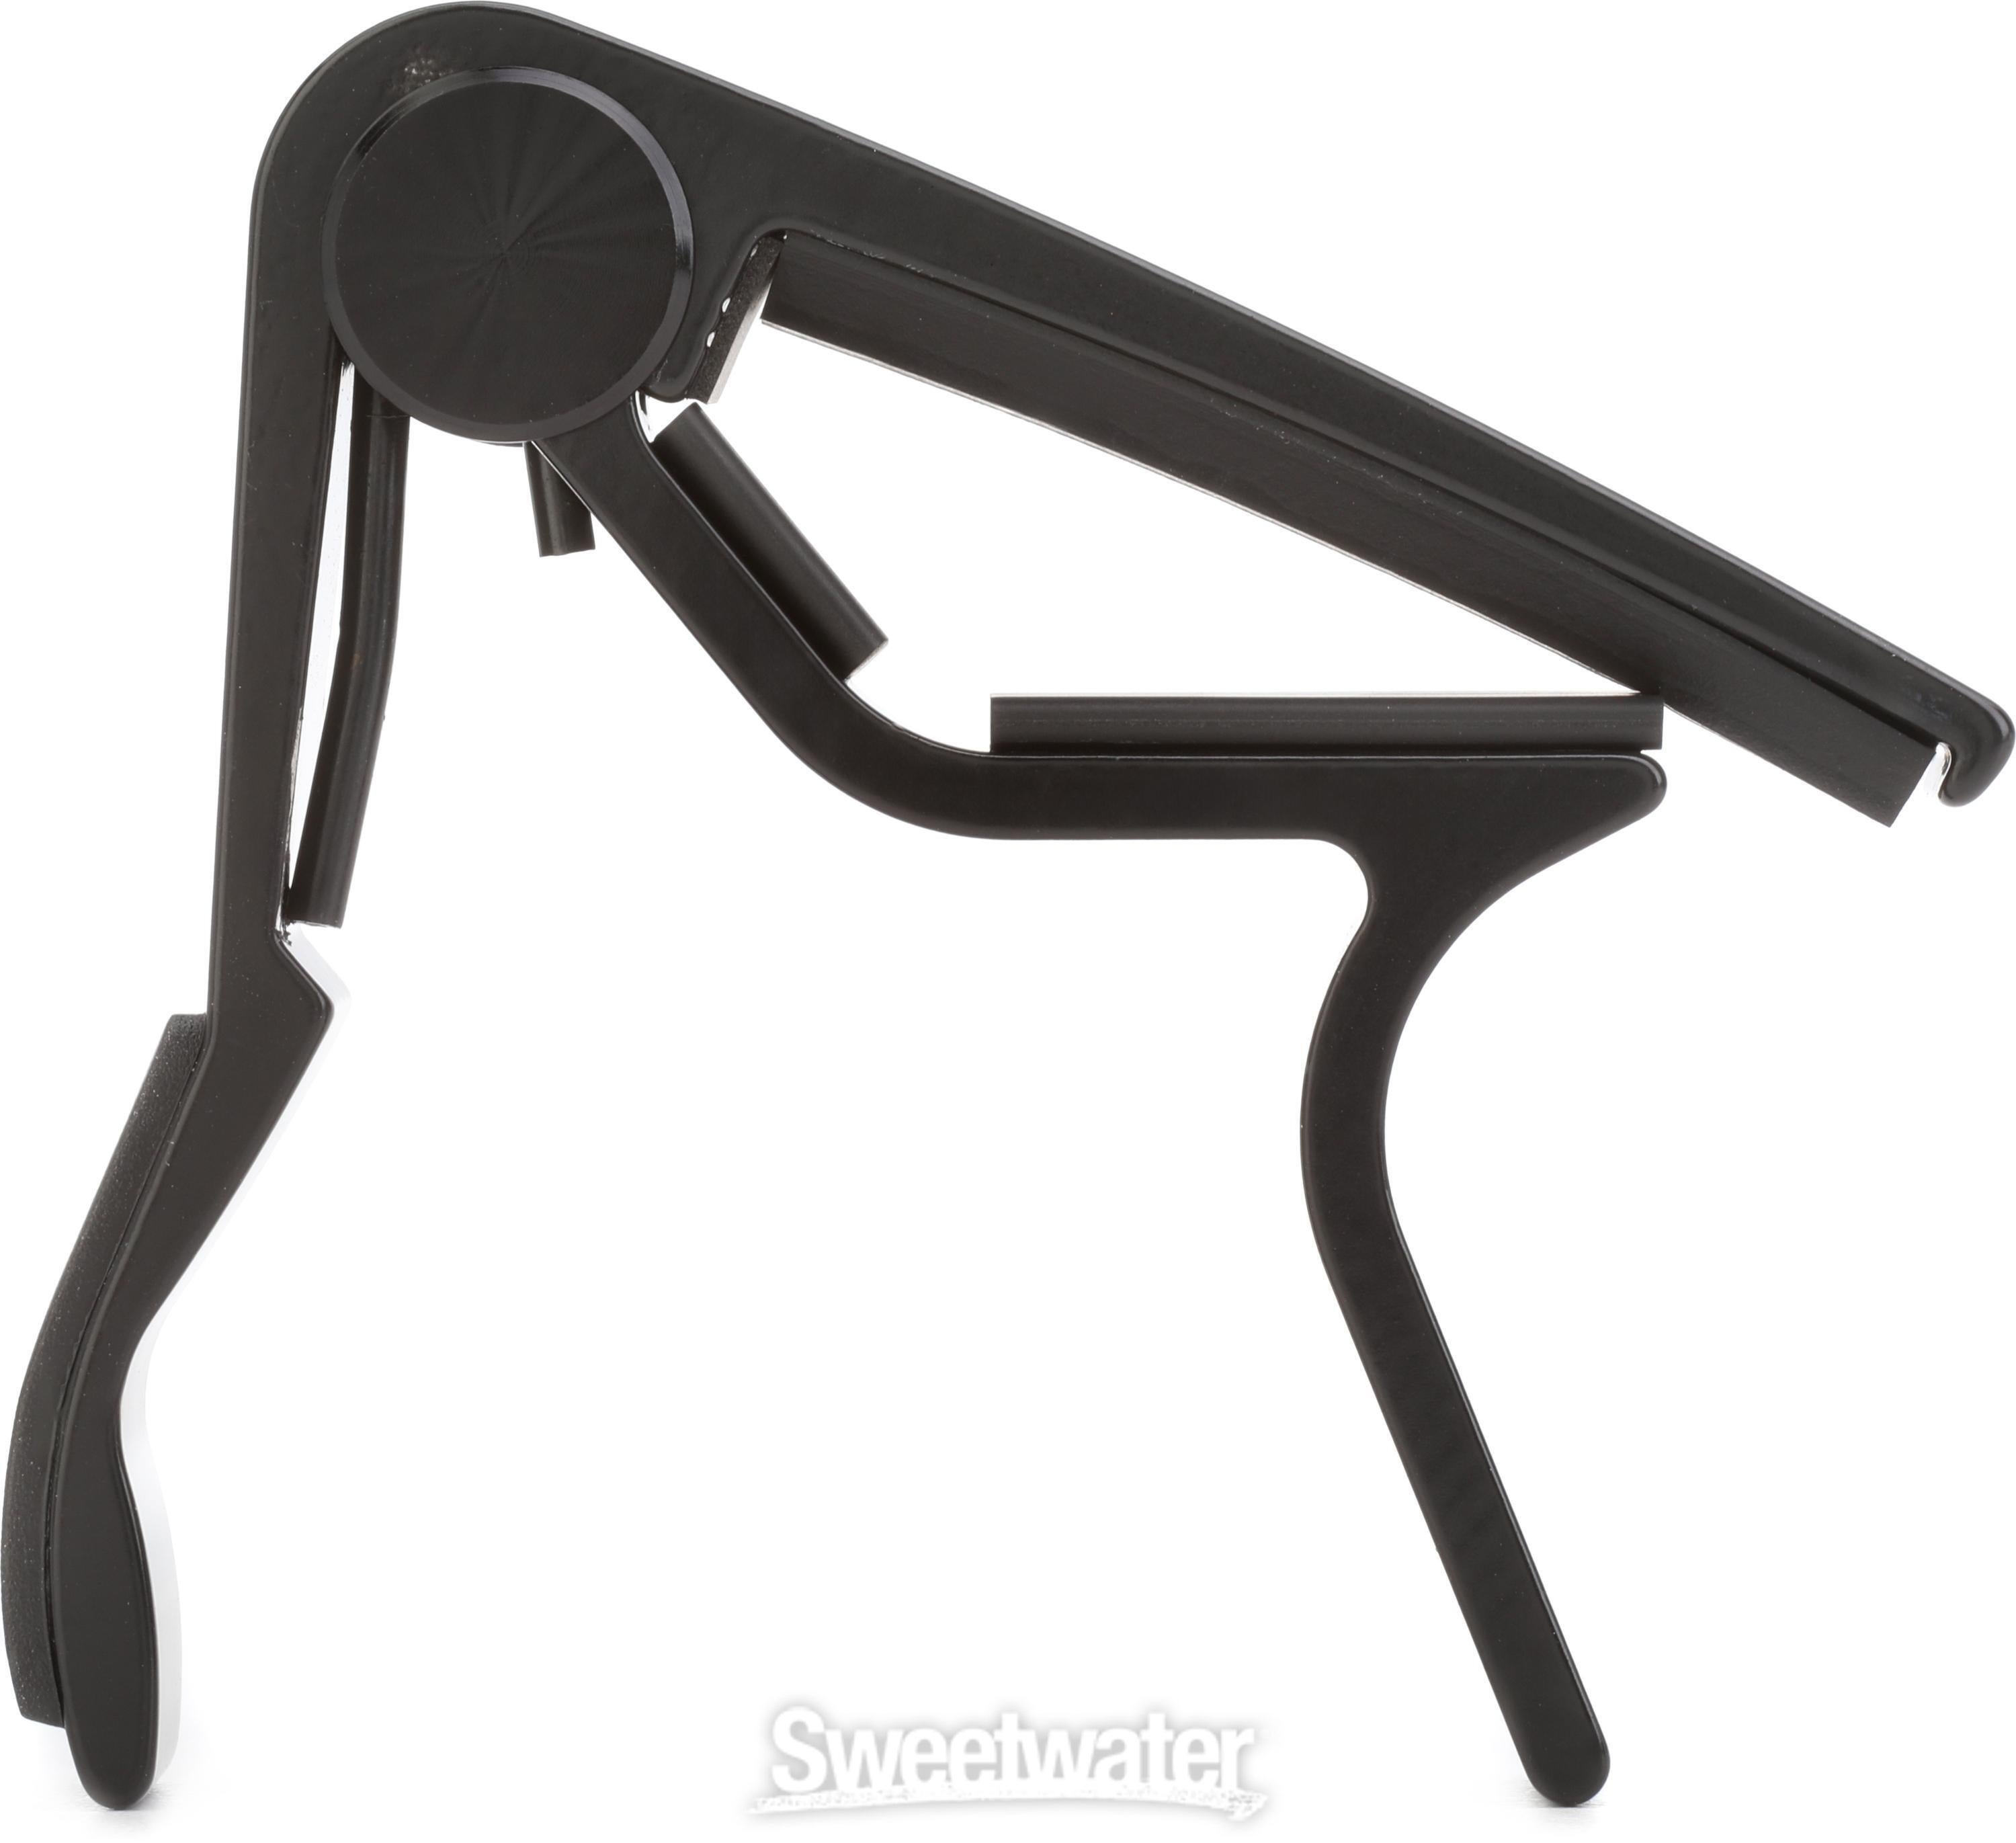 Dunlop 83CB Trigger Acoustic Guitar Capo - Black | Sweetwater